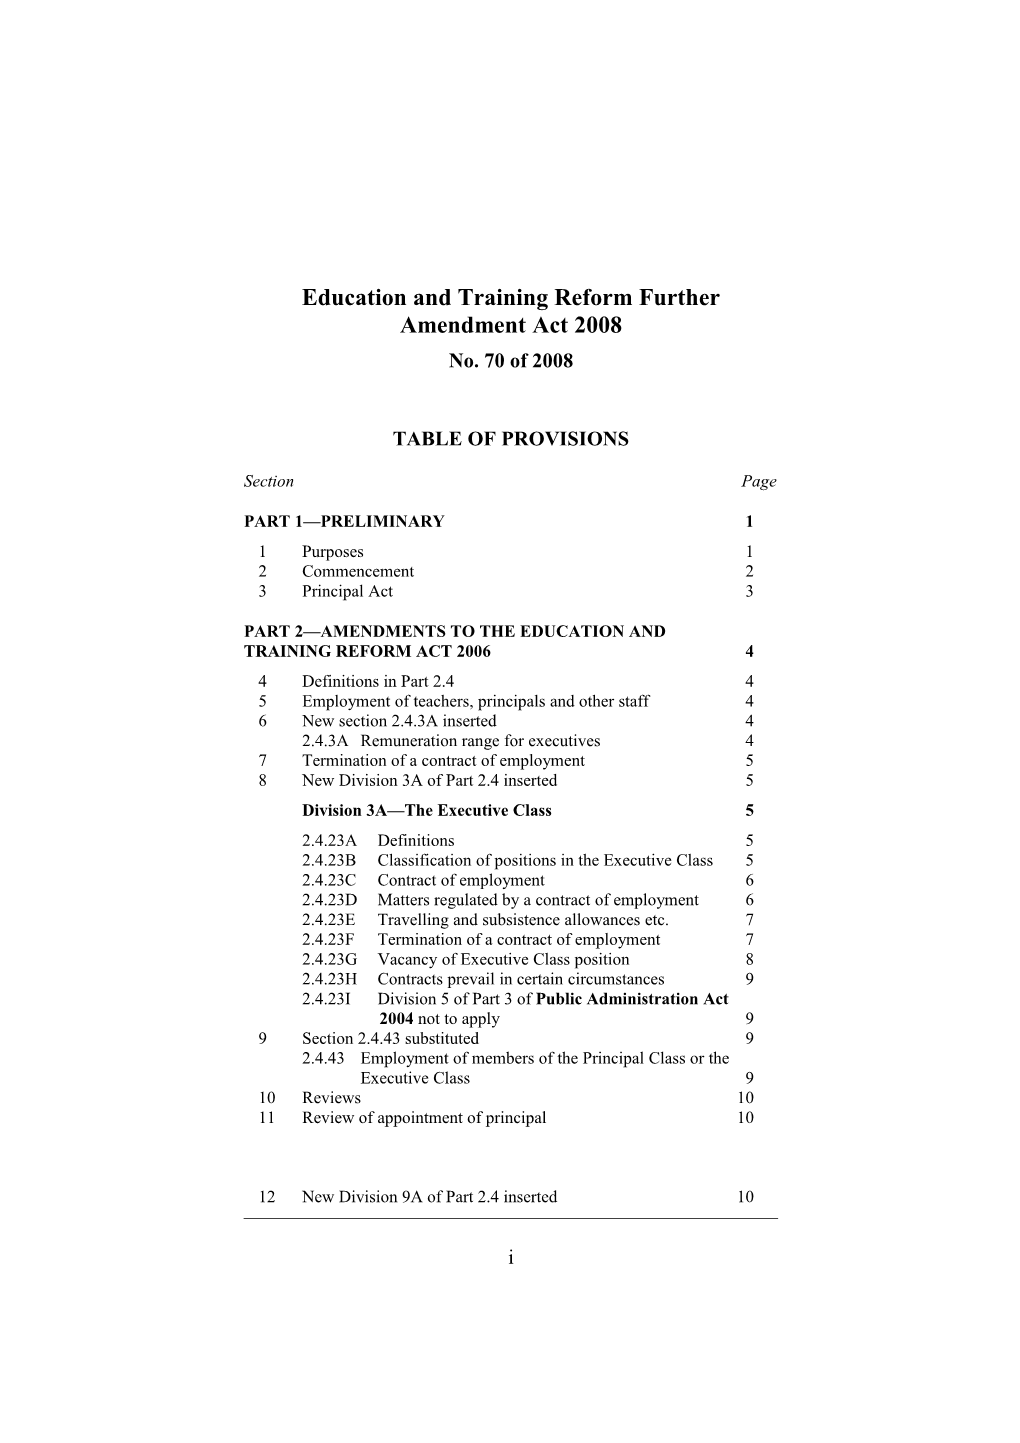 Education and Training Reform Further Amendment Act 2008